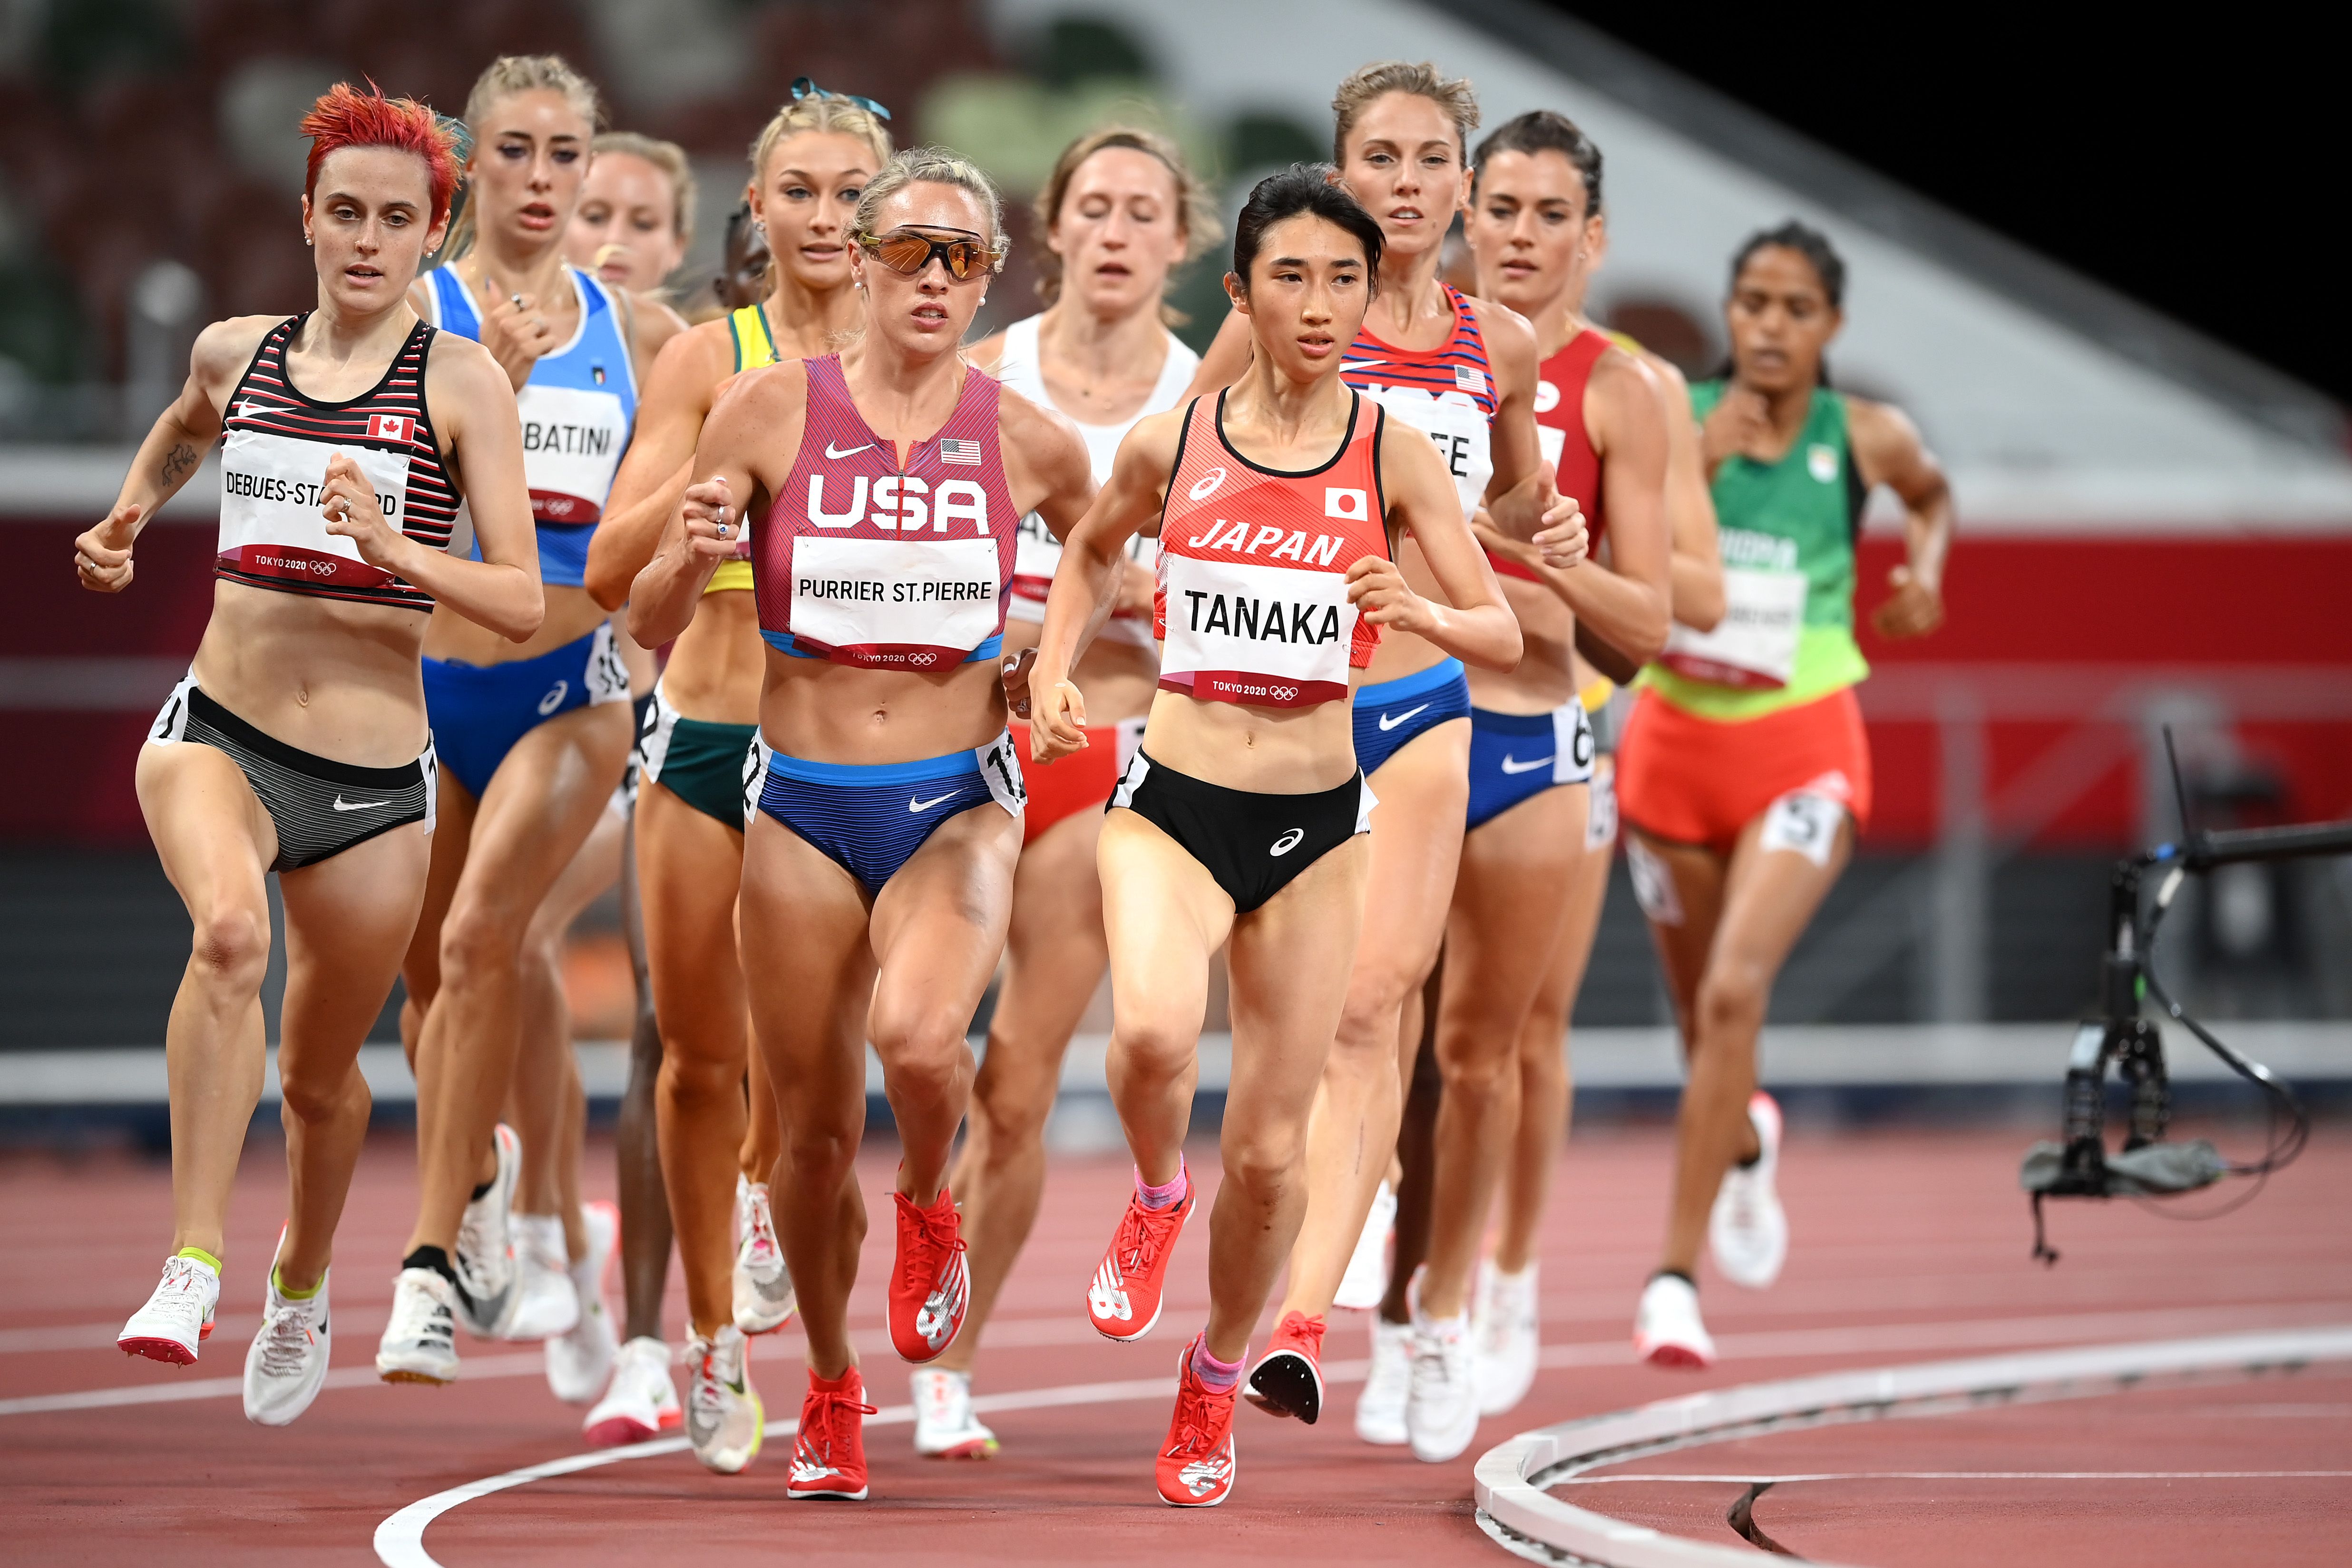 Nozomi Tanaka competes in the 1500m at the Tokyo 2020 Olympics